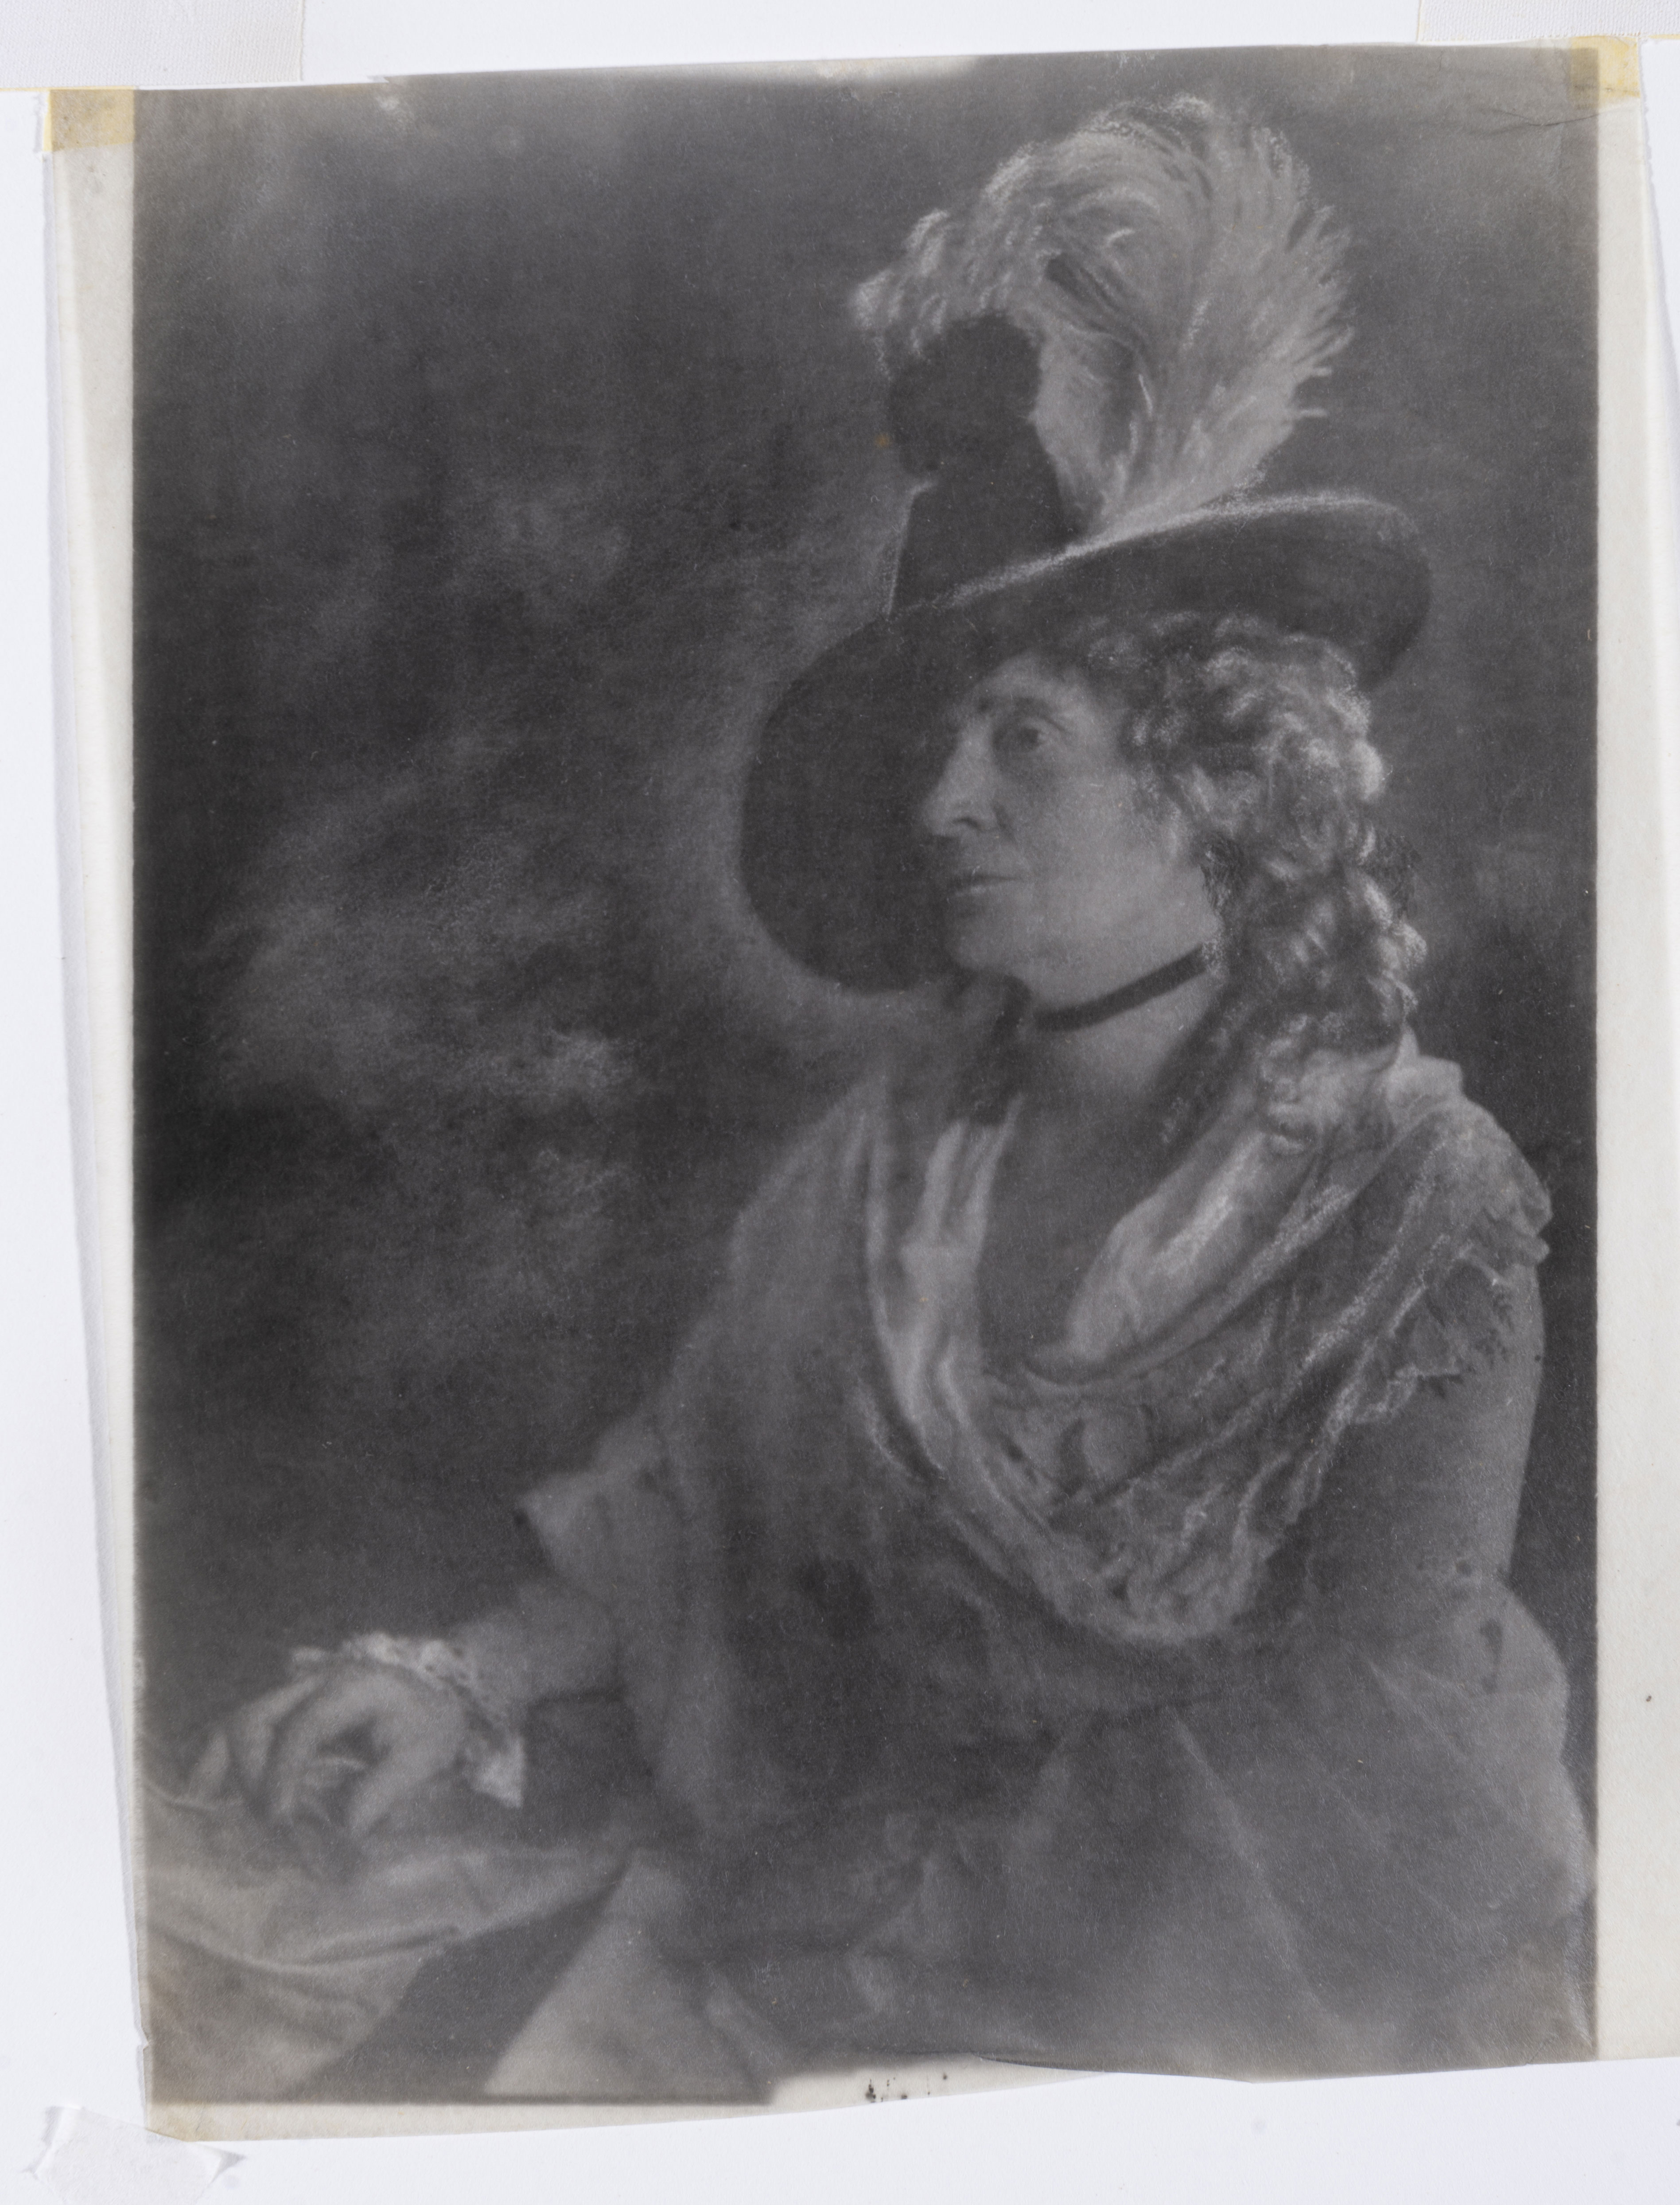 Nancy Ford Cones (American, 1869–1962), Self-portrait as Sarah Siddons (detail), about 1930, tissue print. Collection of W. Roger and Patricia K. Fry